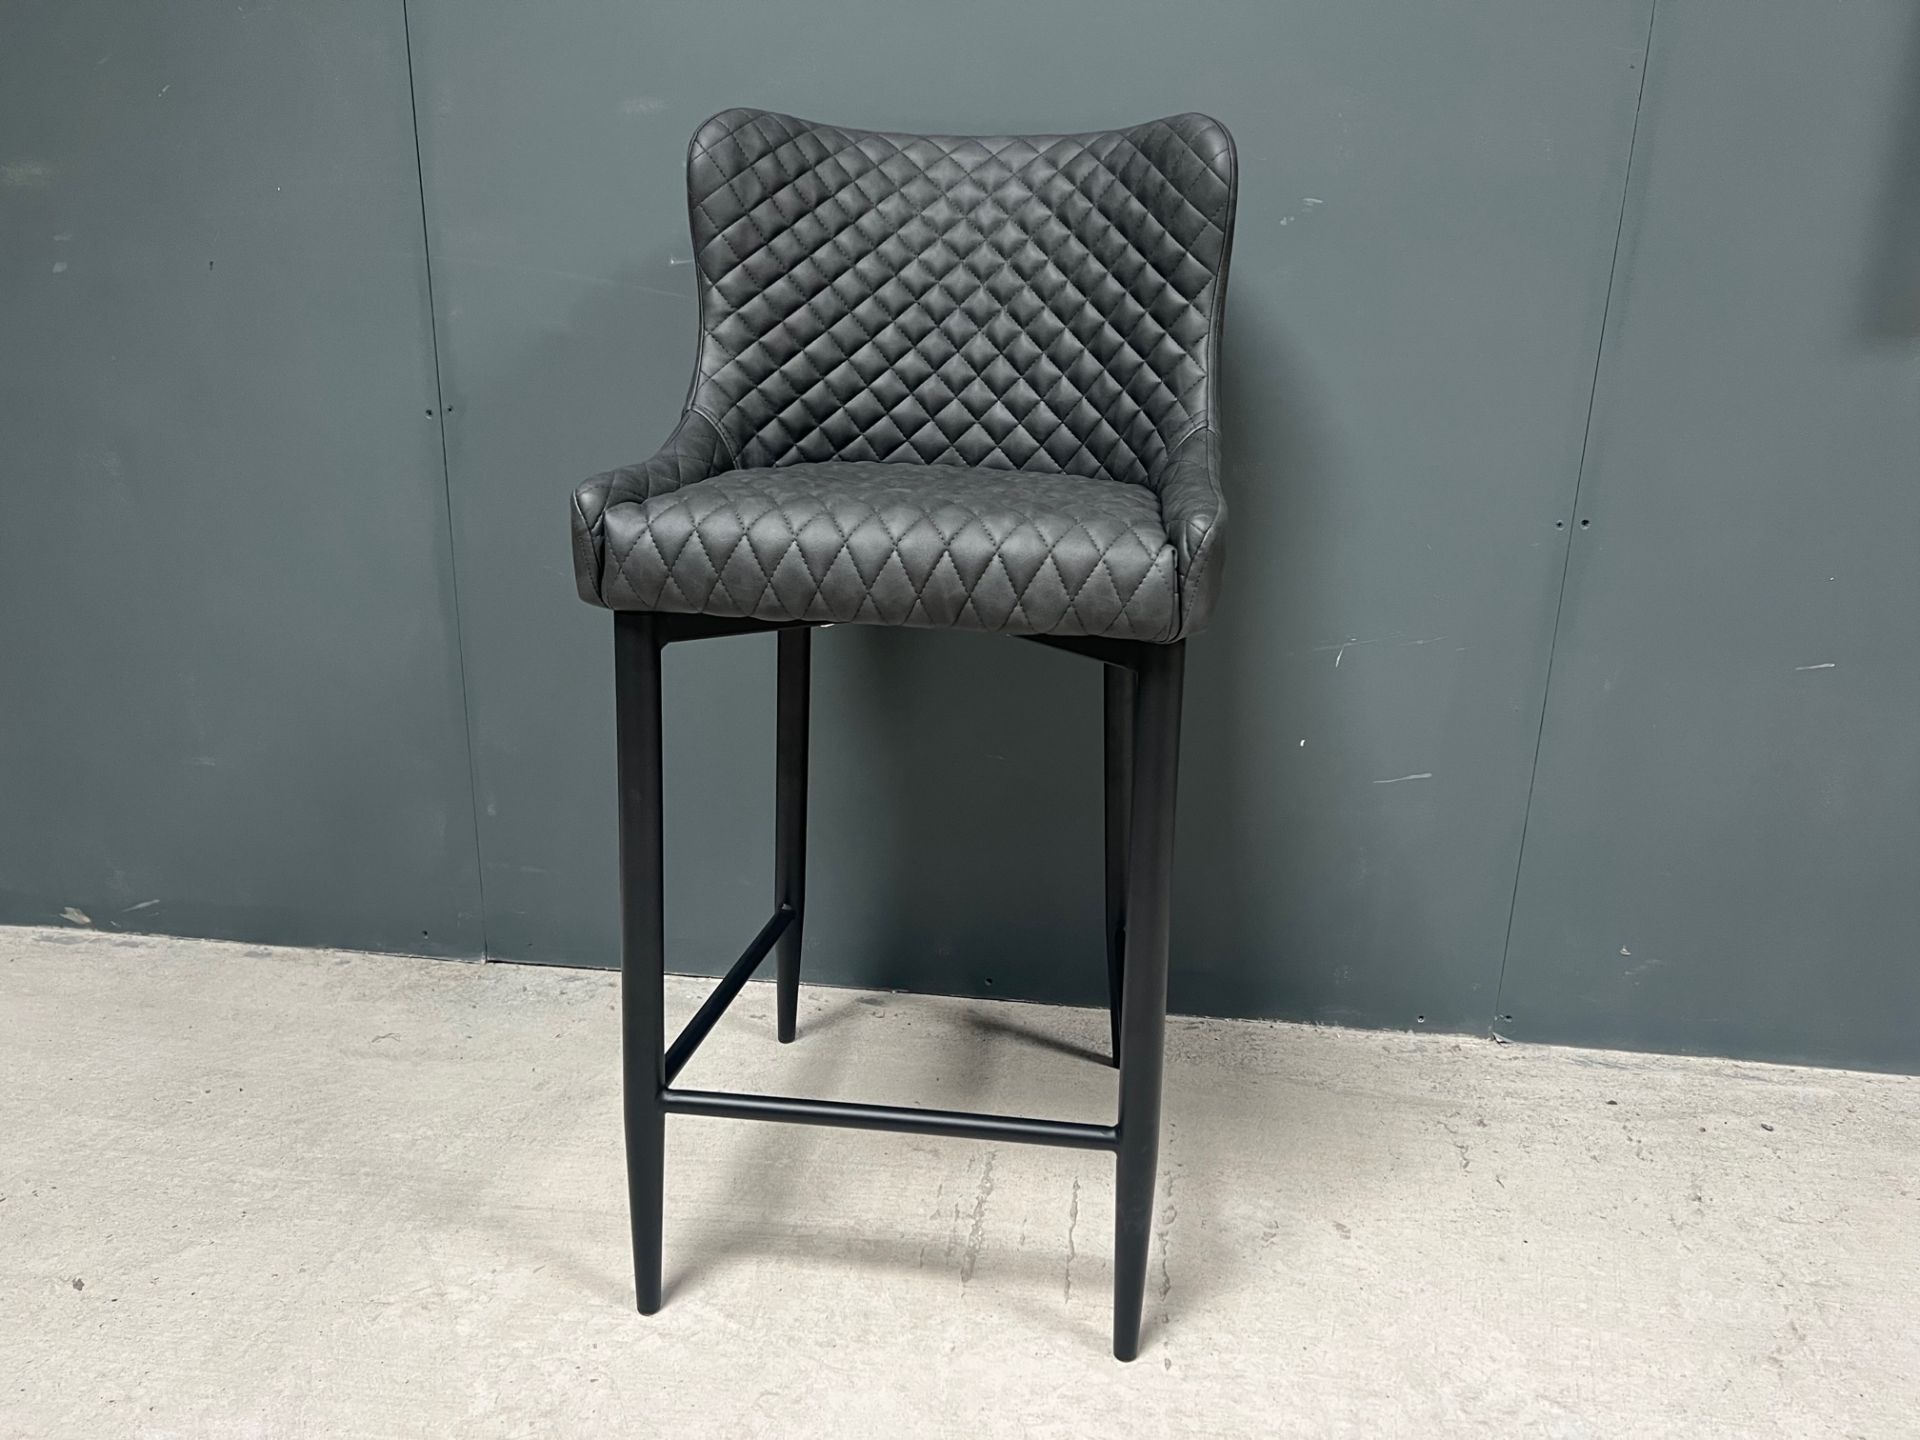 Boxed New Pair Of Classic Faux Leather High Bar Stools In Charcoal